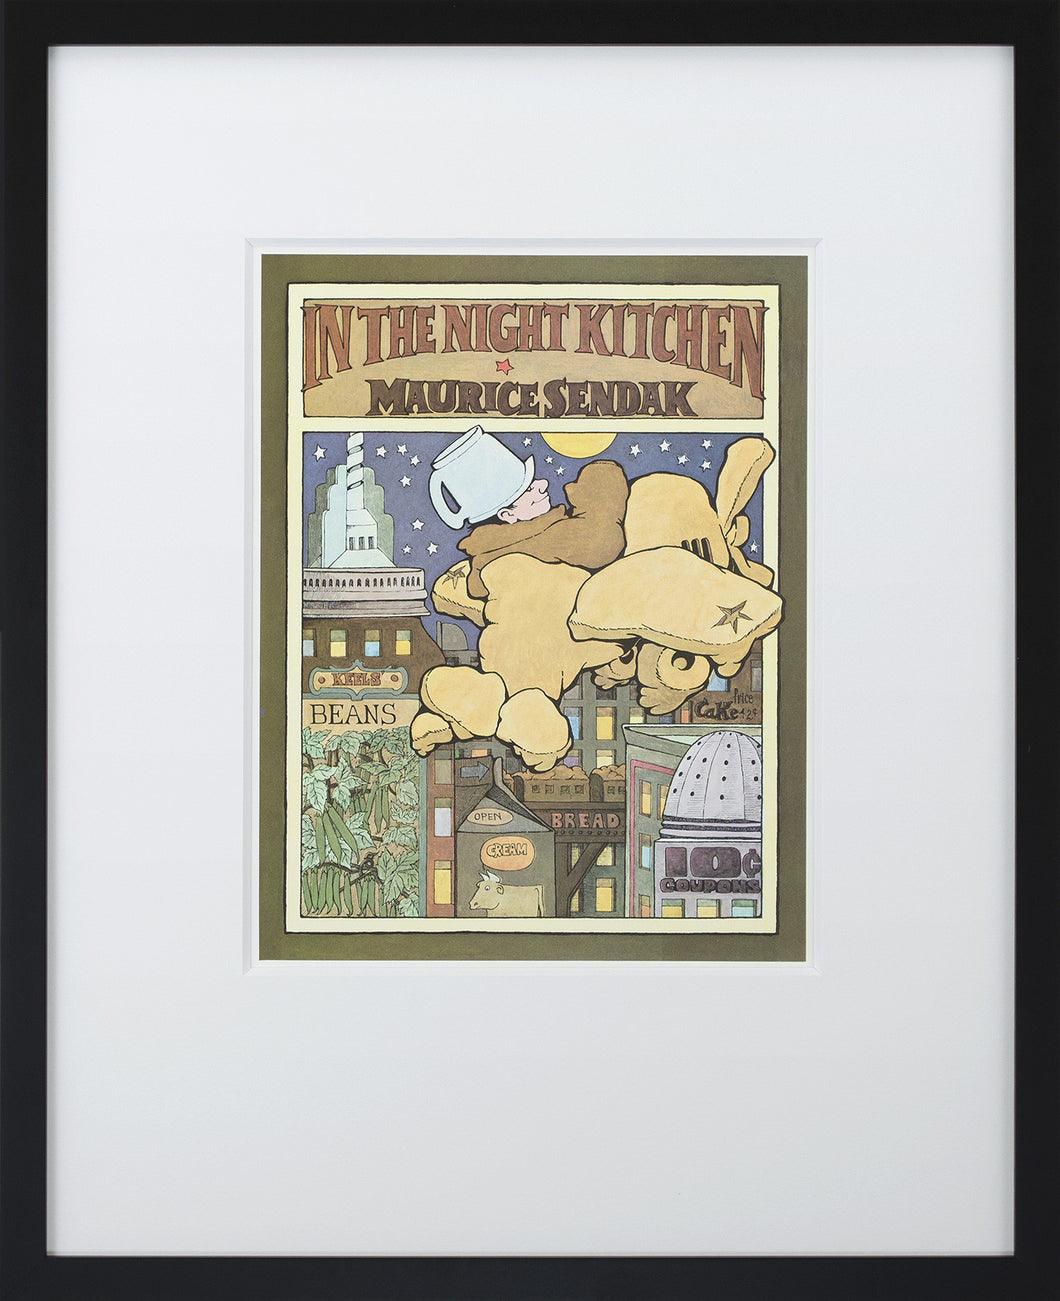 Into the Night Kitchen by Maurice Sendak Vintage Print Framed in Black - Special Edition, by 2020ArtSolutions